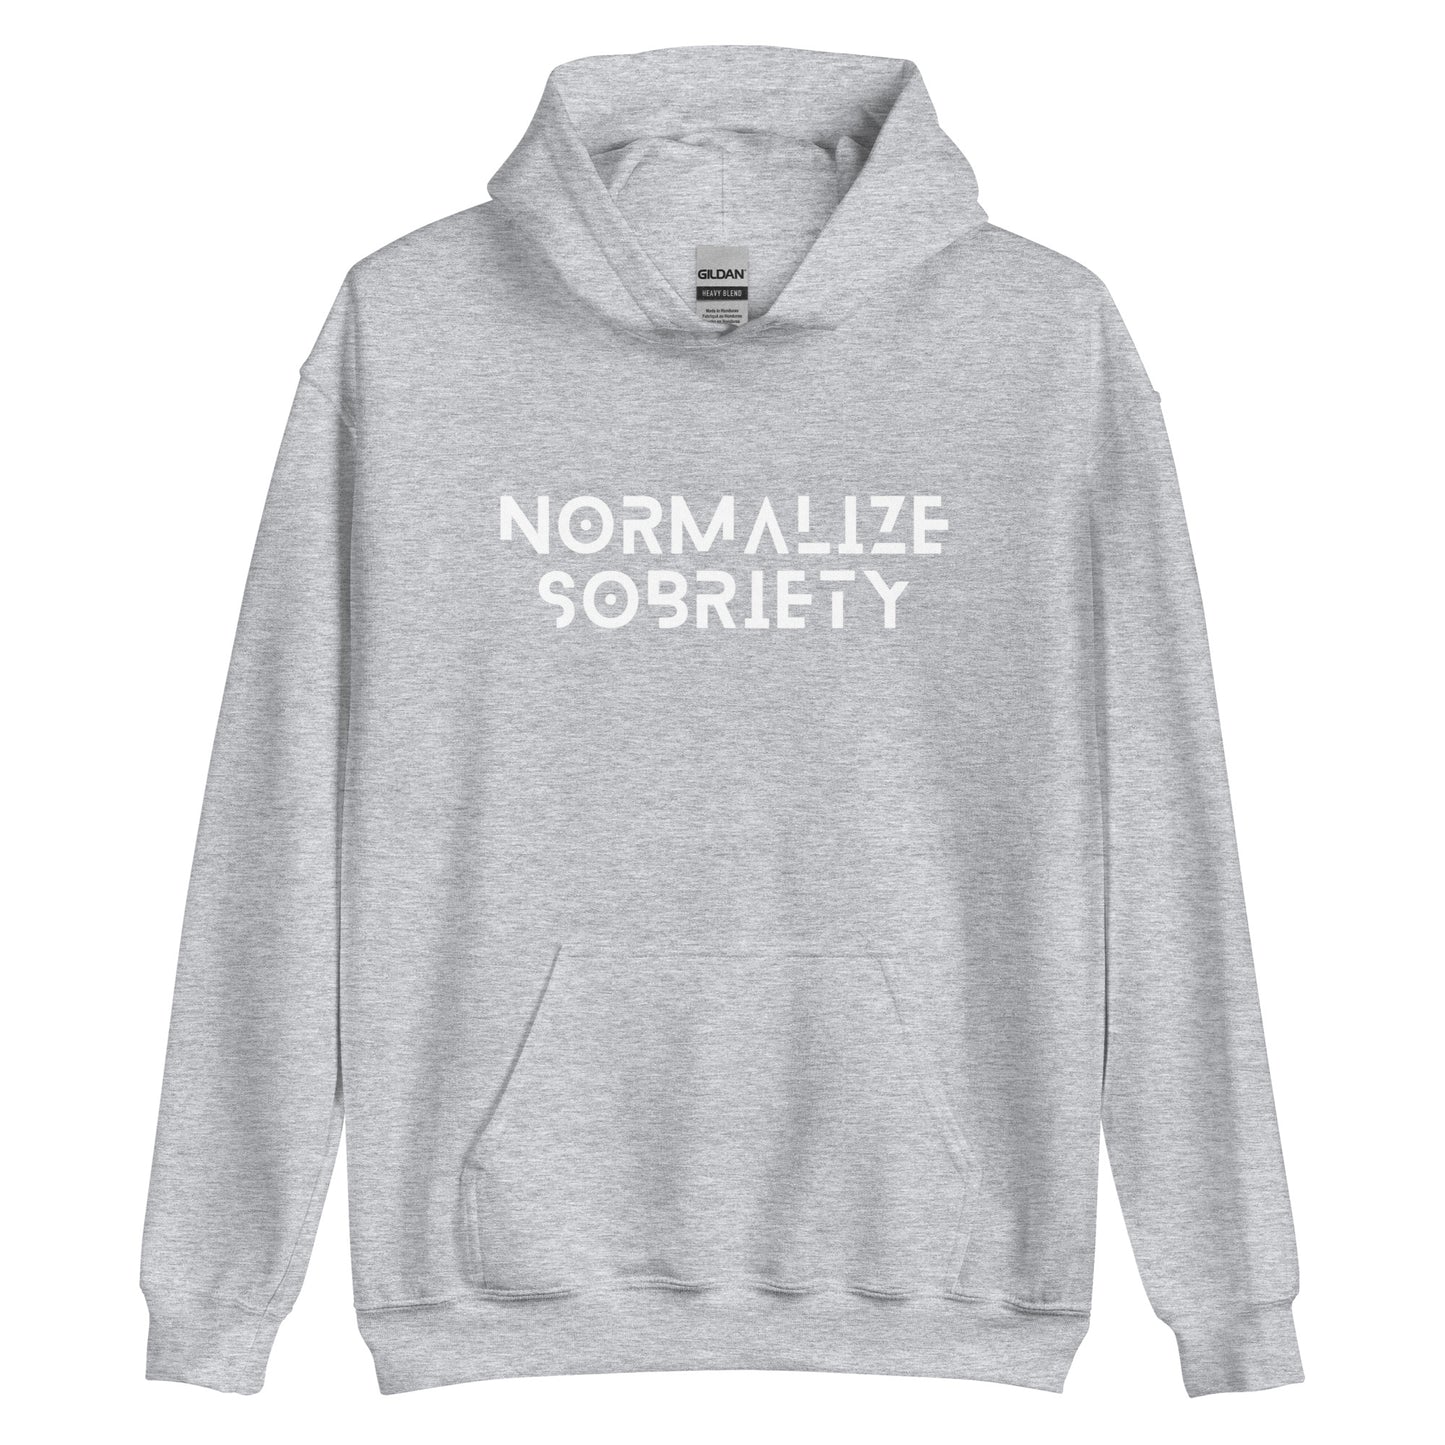 Normalize Sobriety Hoodie